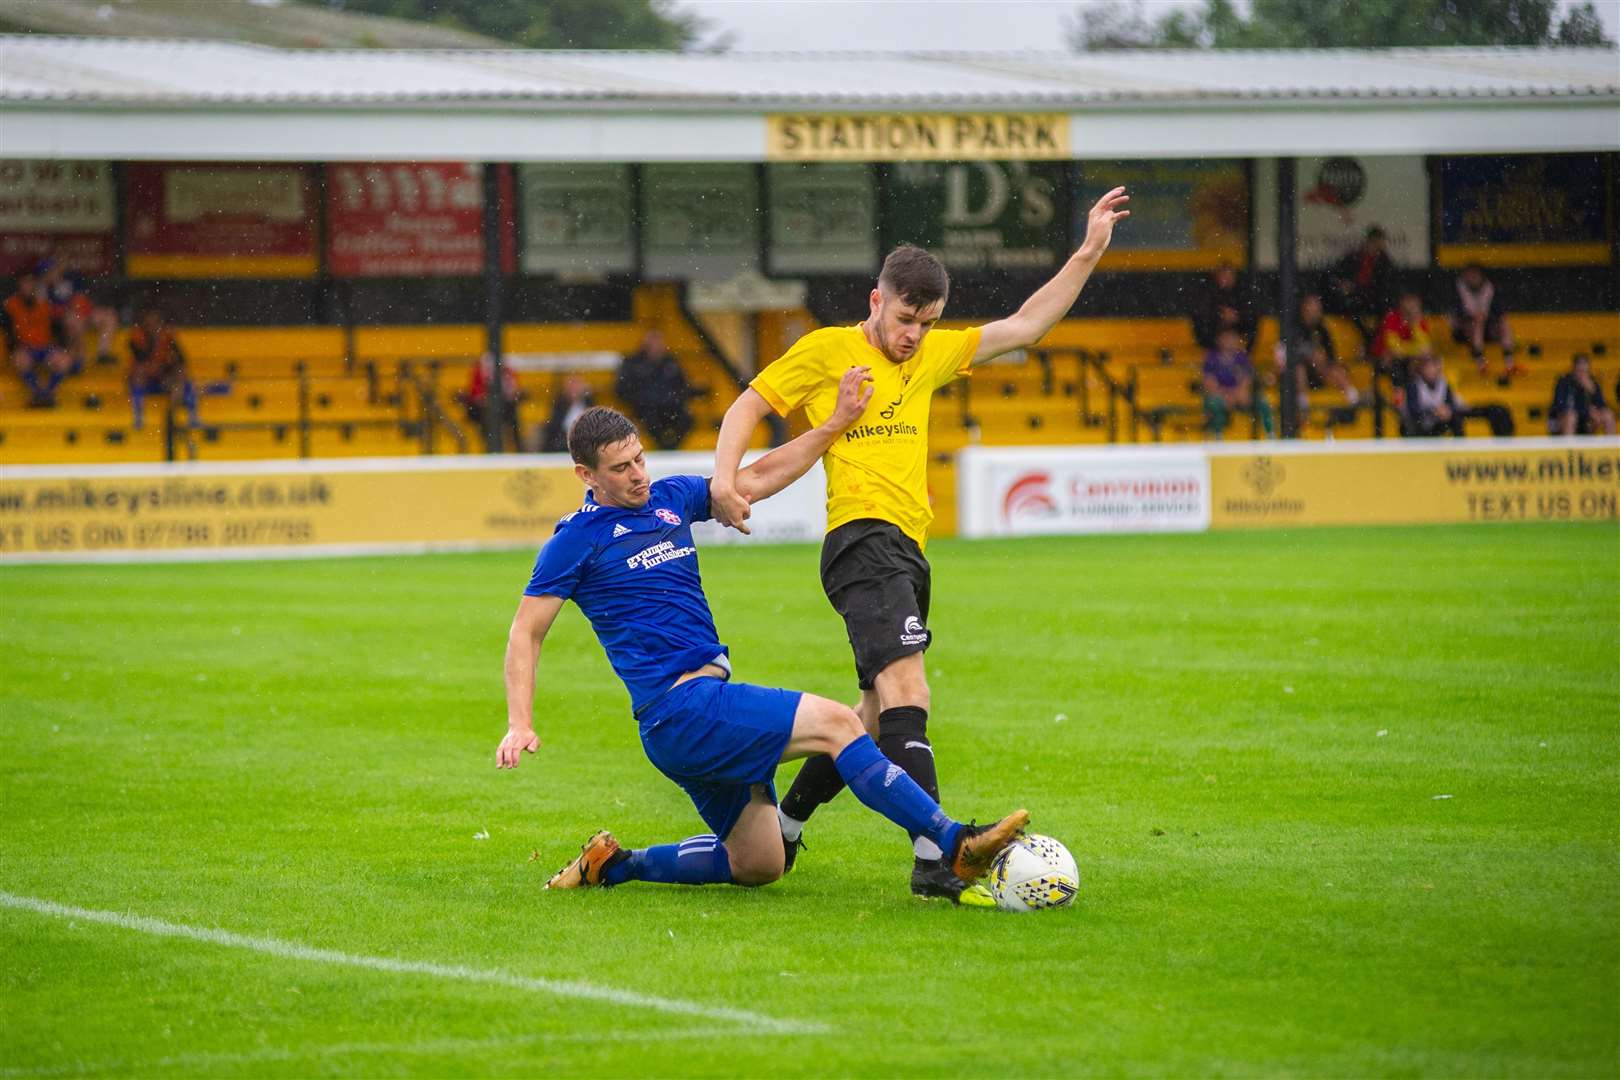 Lossie skipper Liam Archibald goes in for a challenge on Nairn County's Dylan MacKenzie...Nairn County FC (2) vs Lossiemouth FC (4) - North of Scotland Cup first round - Station Park, Nairn 28/07/2021...Picture: Daniel Forsyth..